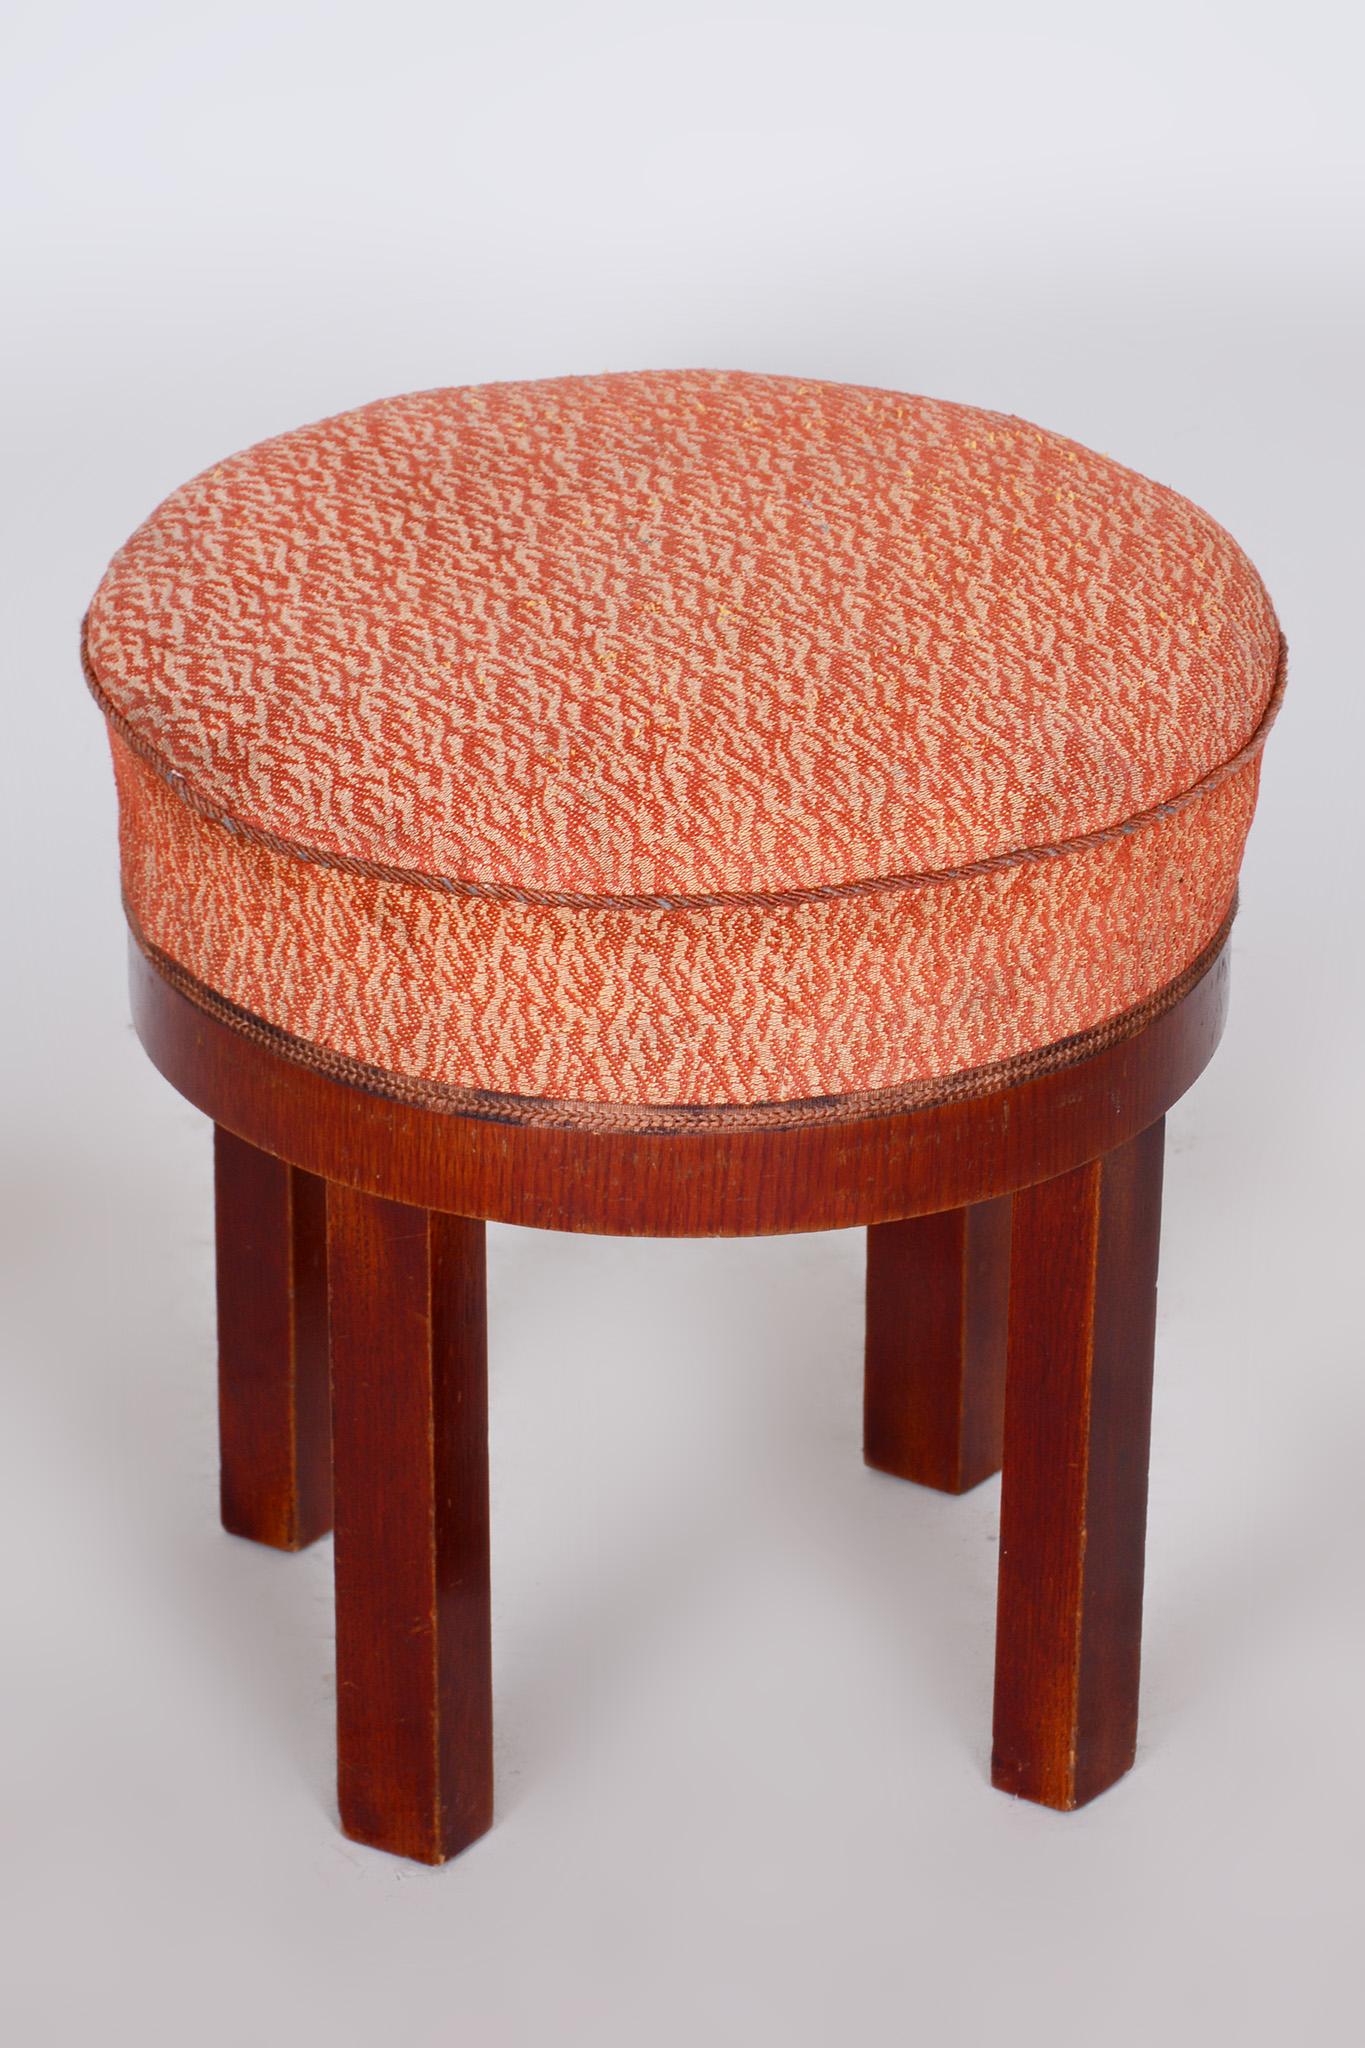 Oak Artdeco Foot Stool Made in´30s Czechia, Original Upholstery, Revived Polish In Good Condition For Sale In Horomerice, CZ